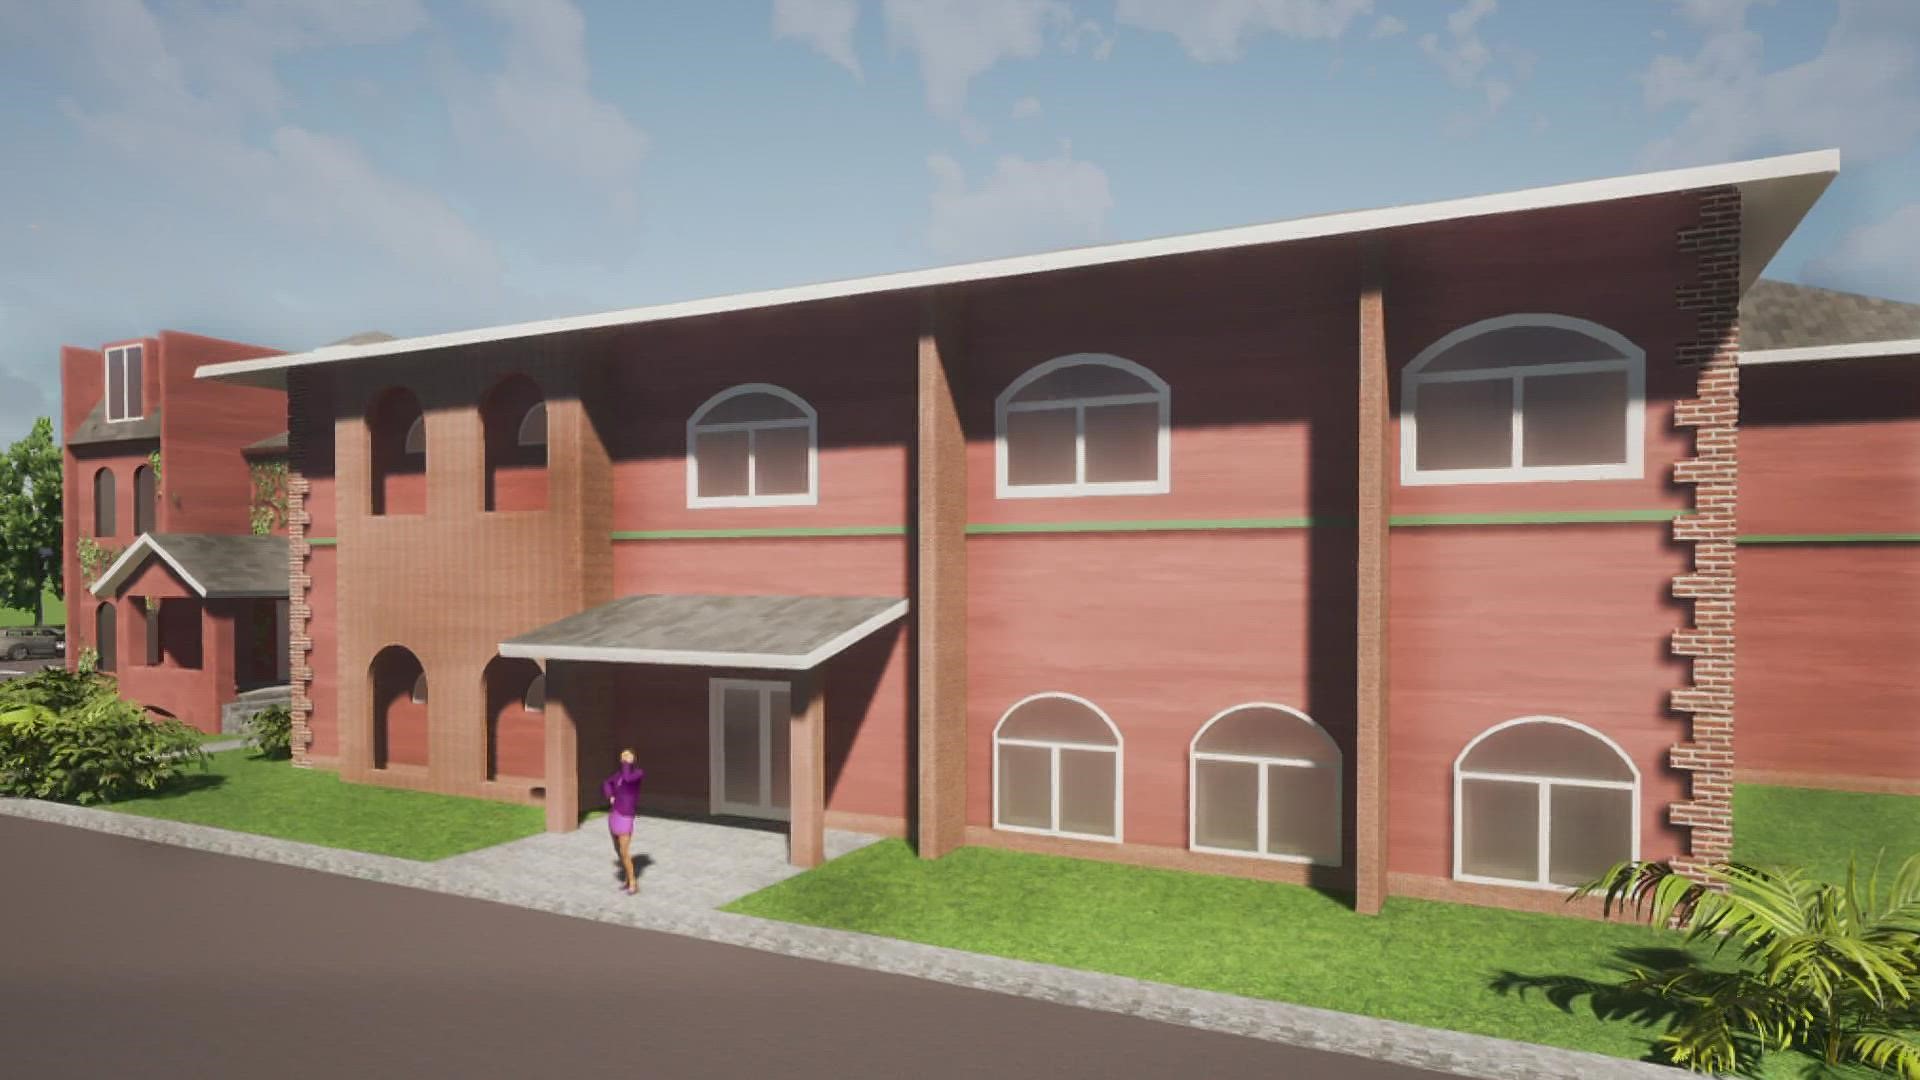 Members of the AKA's Gamma Omega Chapter are now turning the former home of their national founder's family into a museum. Construction is to begin in the spring.